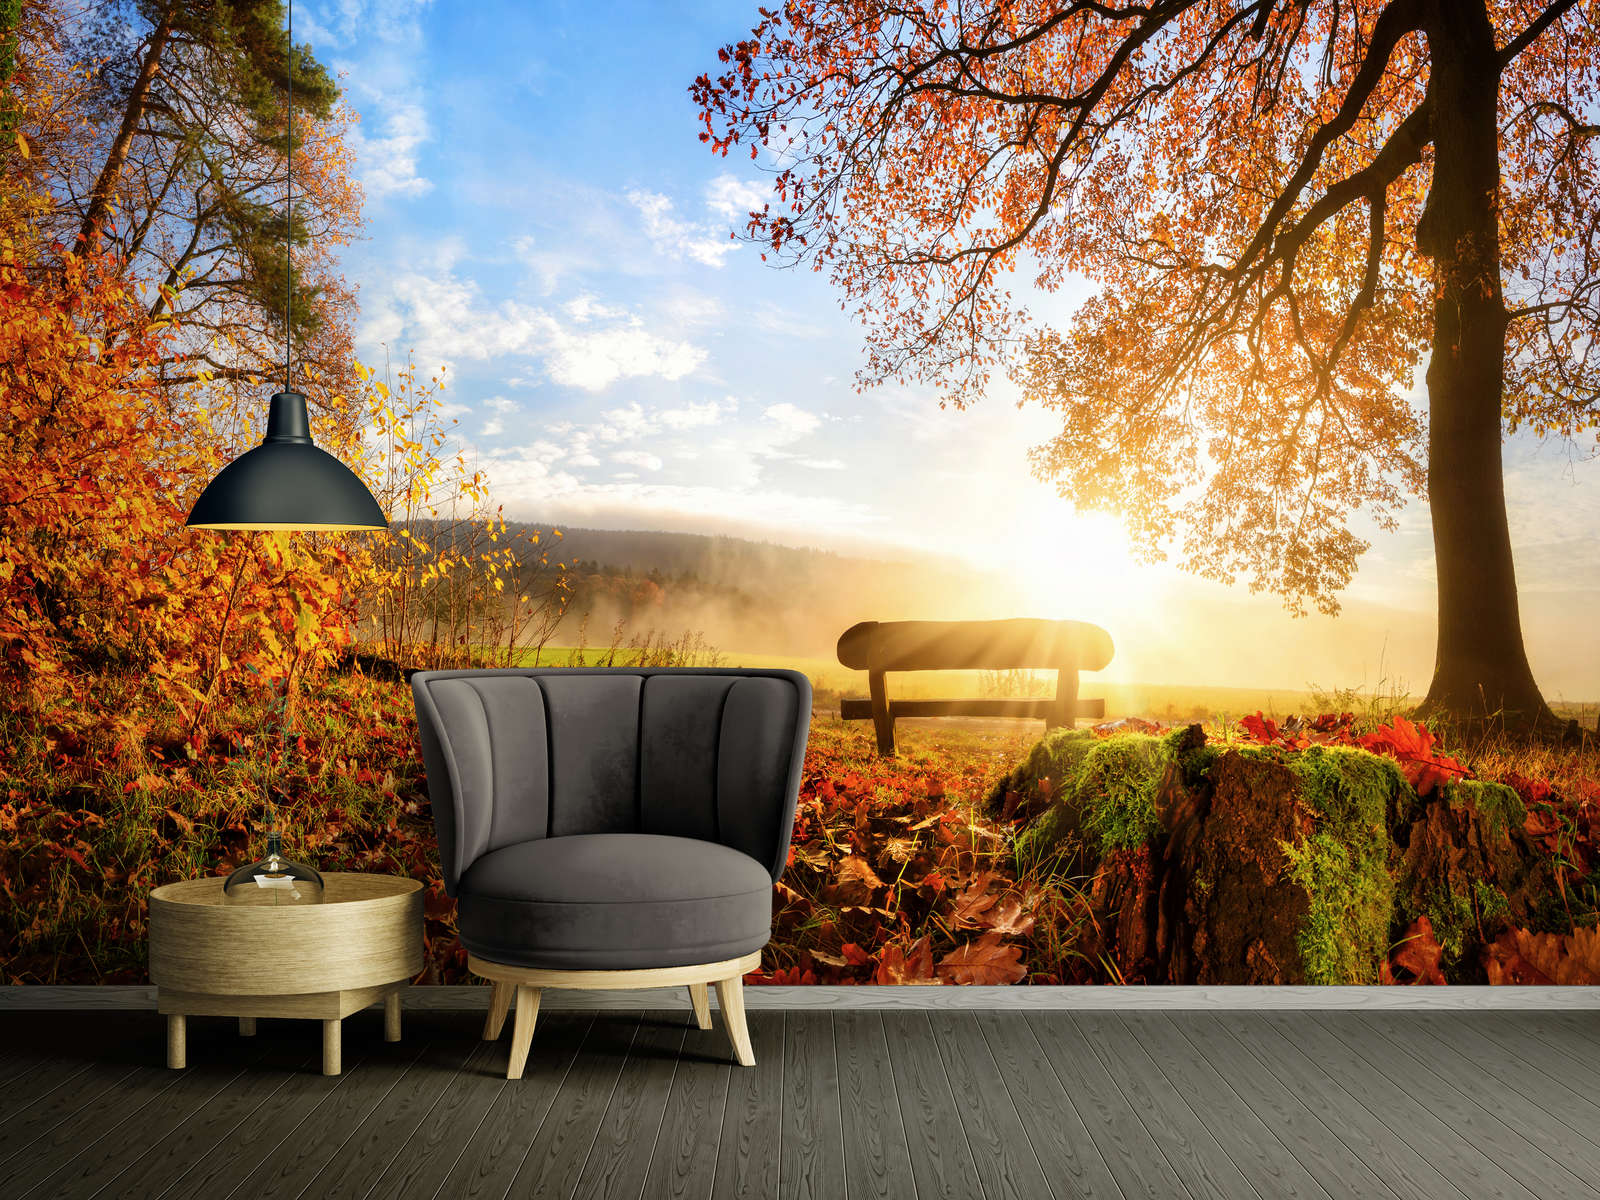             Photo wallpaper Bench in the forest on an autumn morning - Matt smooth non-woven
        